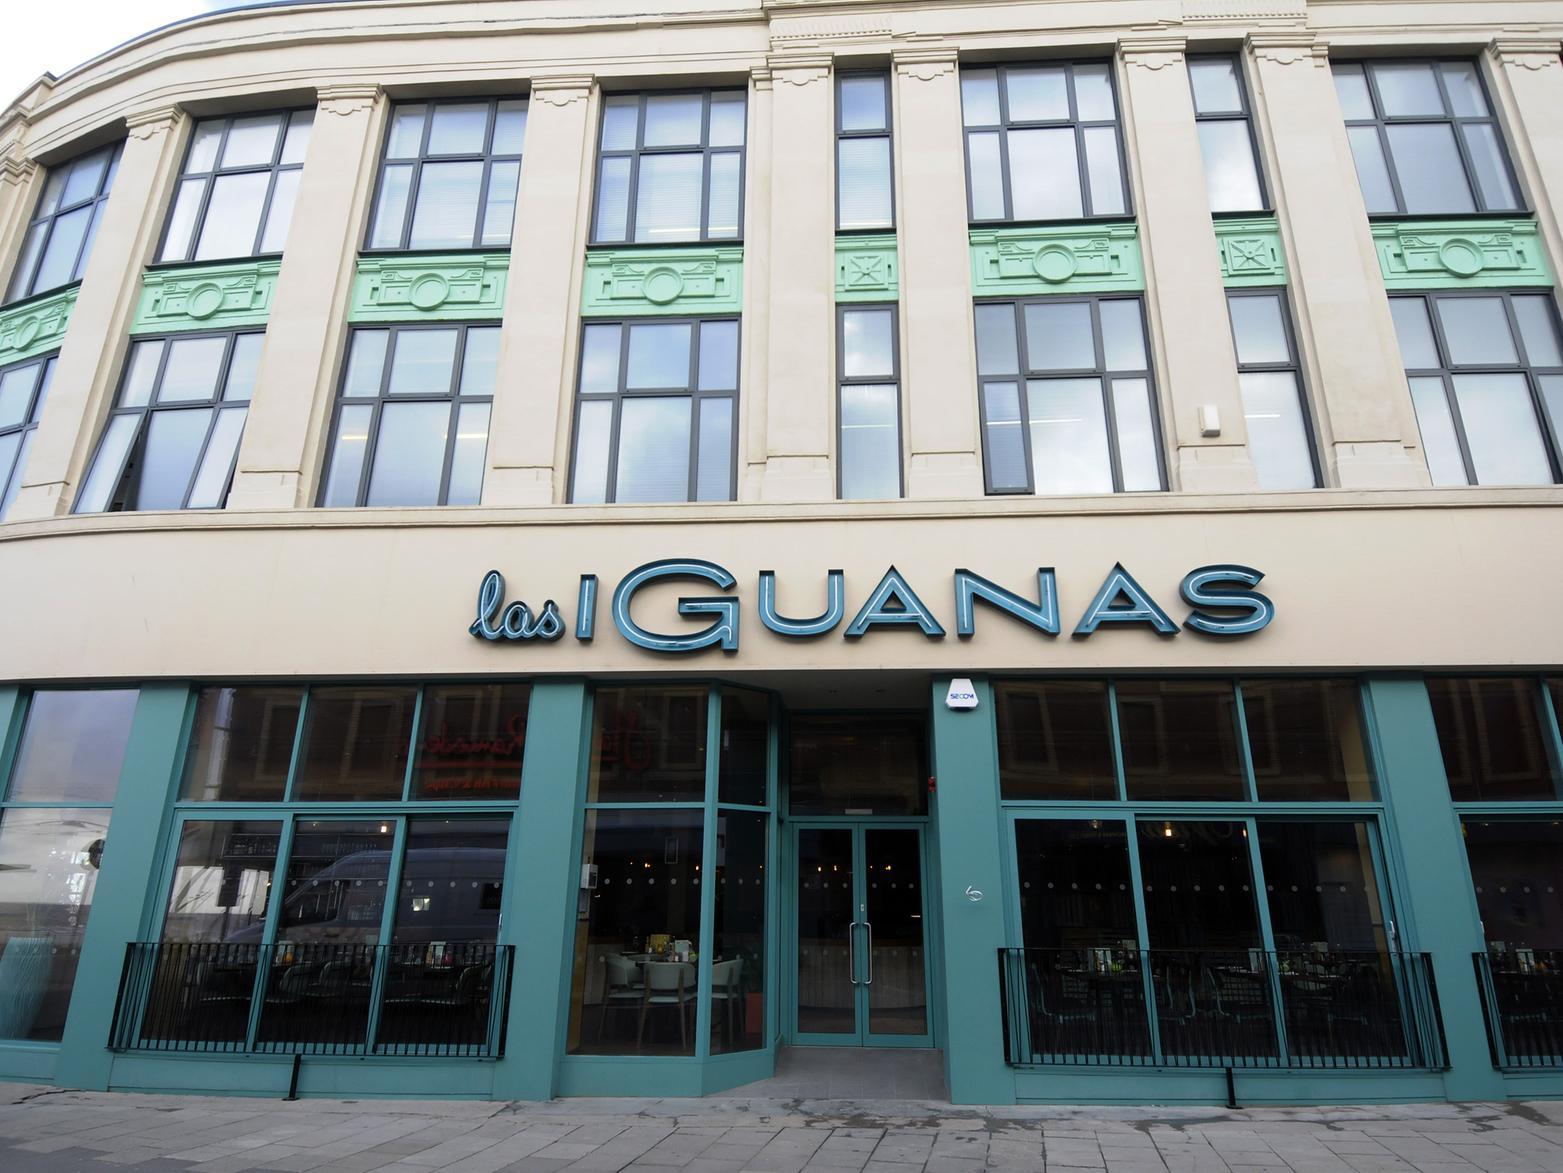 Christmas parties at Las Iguanas start from 14.95 per person.